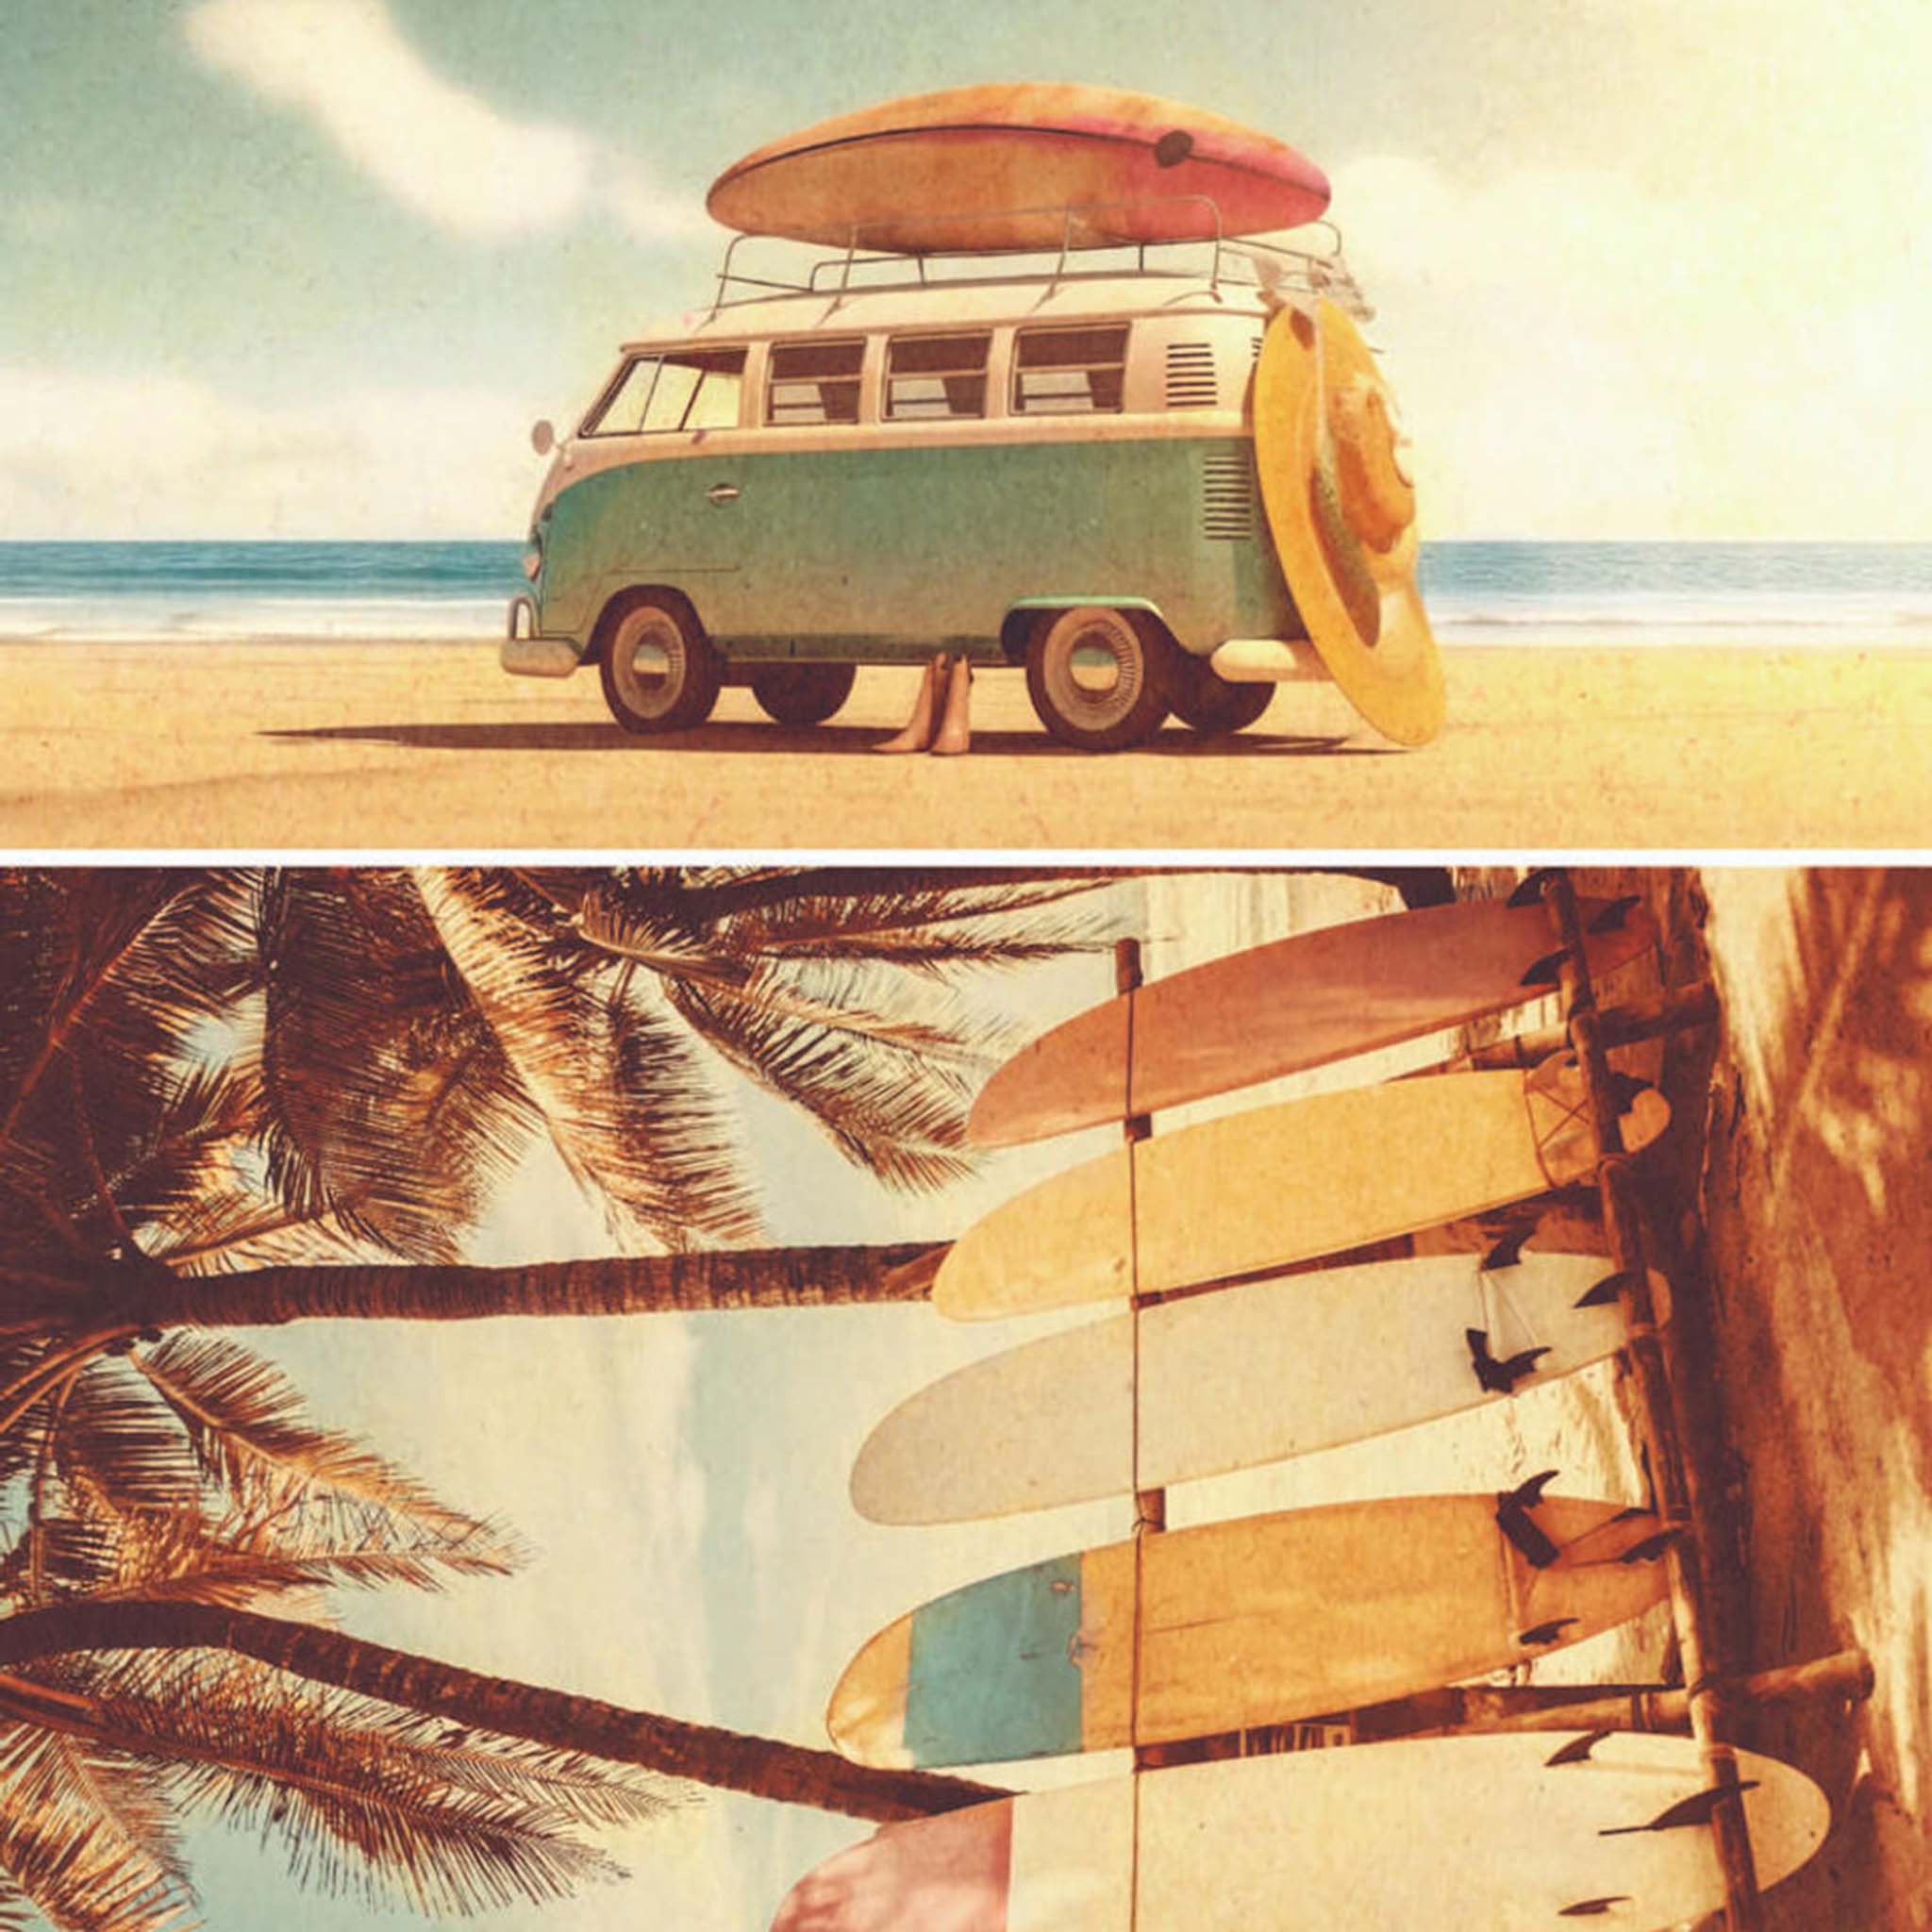 Close-up of an A1 rice paper design featuring two designs, a vintage van with a surfboard on top and surfboards by palm trees on the beach.